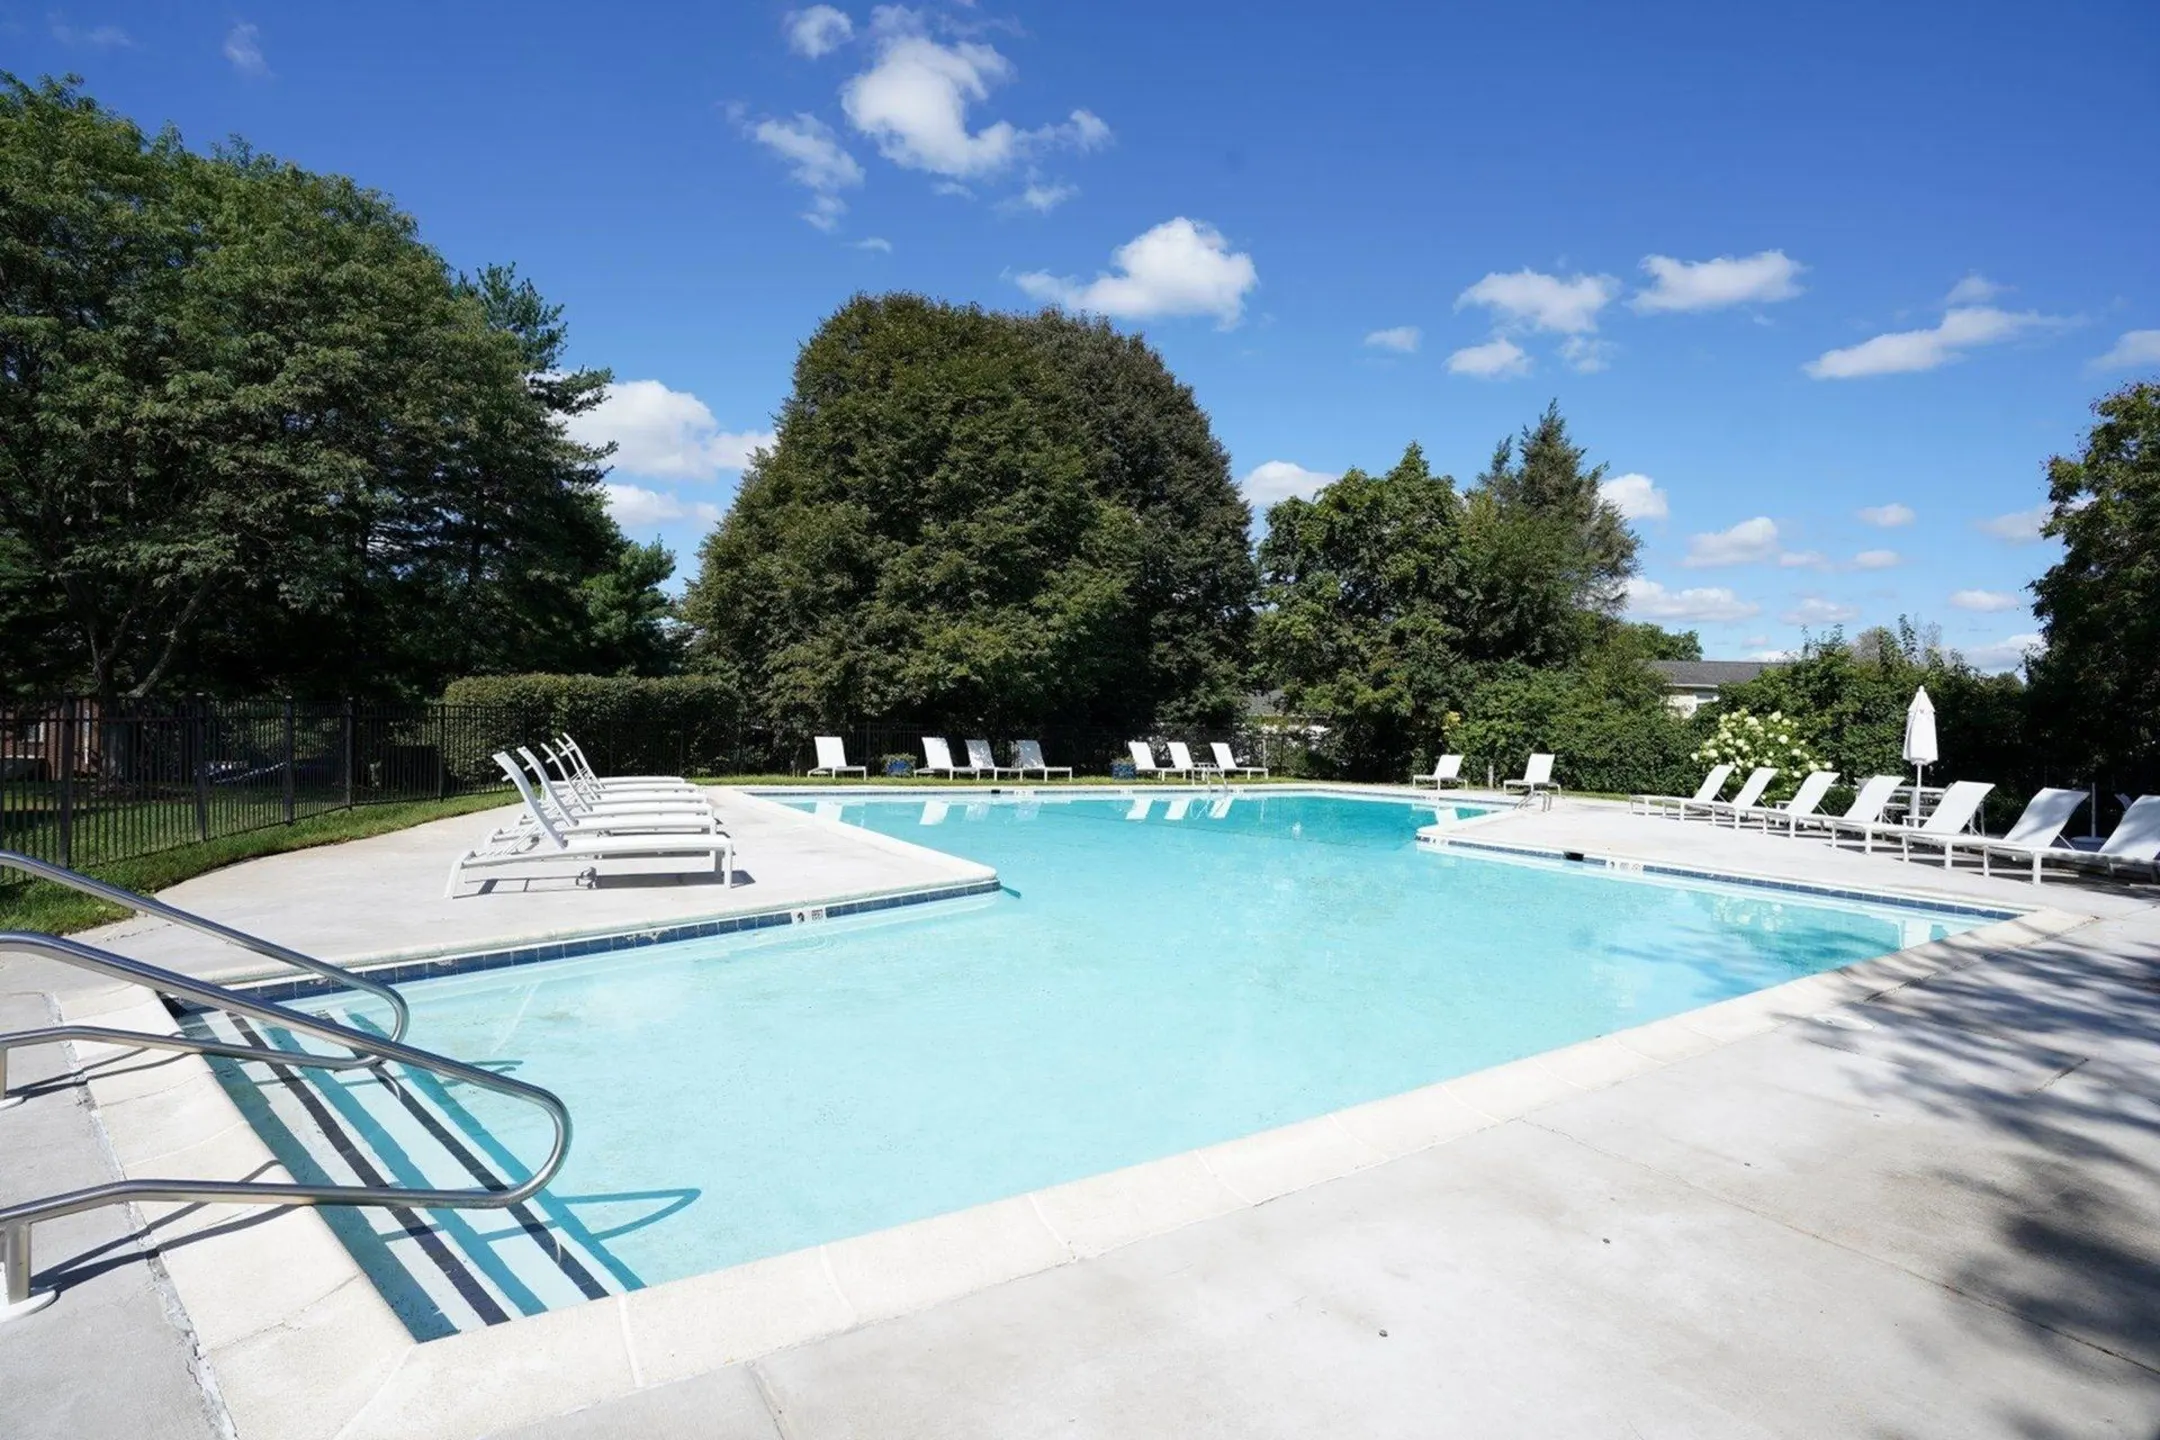 Pool - Willowbrook Apartments Boothwyn - Upper Chichester, PA